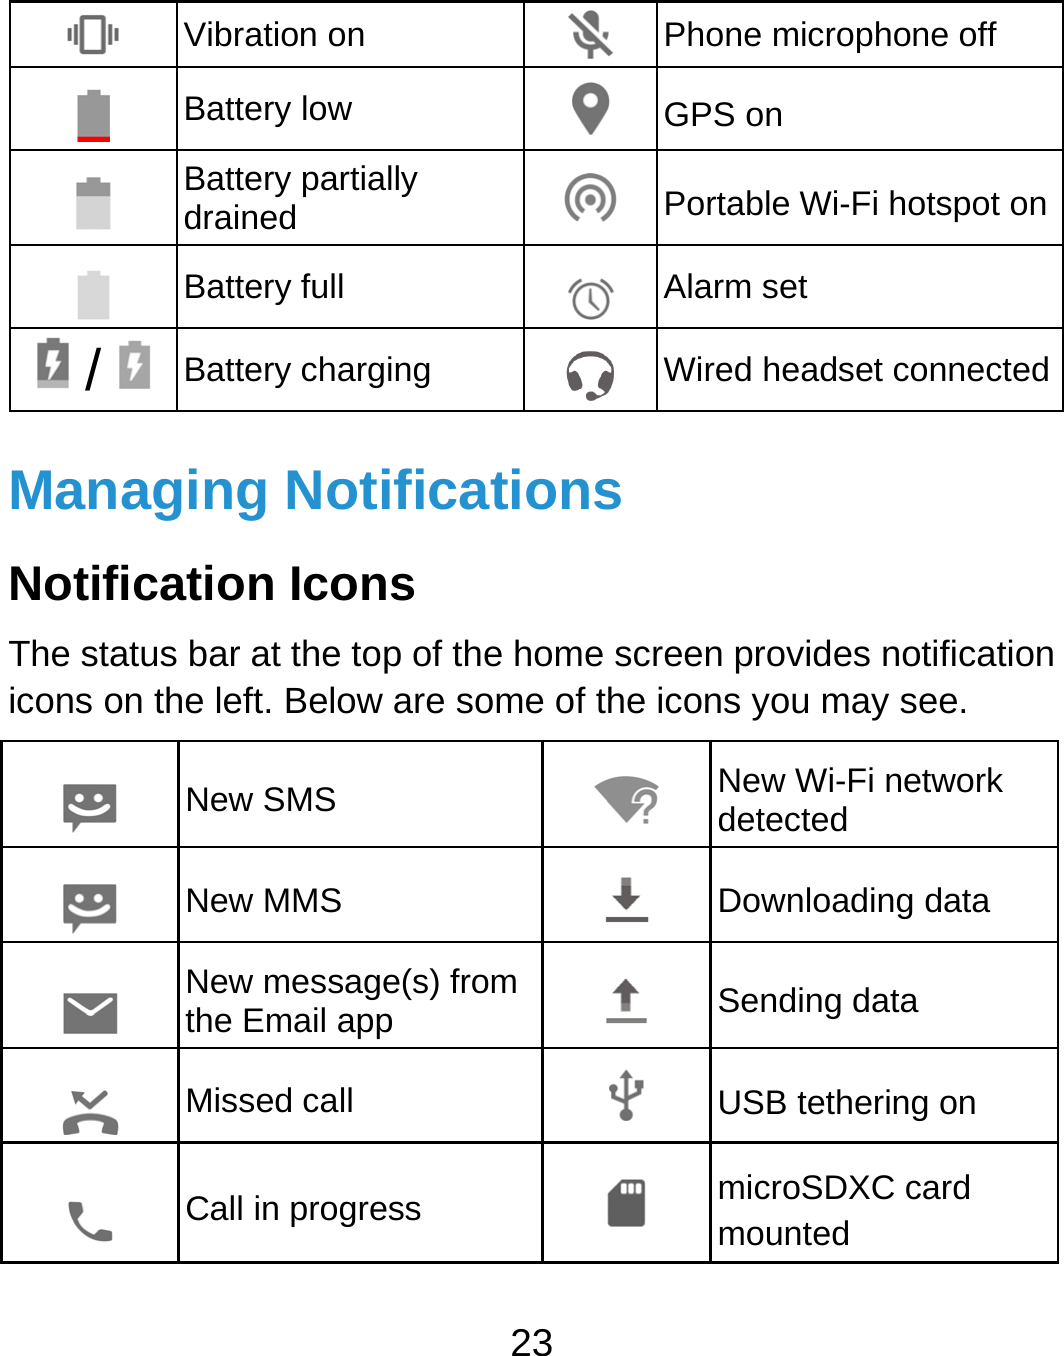 23  Vibration on  Phone microphone off  Battery low   GPS on  Battery partially drained   Portable Wi-Fi hotspot on Battery full  Alarm set  /  Battery charging  Wired headset connectedManaging Notifications Notification Icons The status bar at the top of the home screen provides notification icons on the left. Below are some of the icons you may see.    New SMS   New Wi-Fi network detected  New MMS   Downloading data   New message(s) from the Email app   Sending data  Missed call   USB tethering on  Call in progress   microSDXC card mounted 